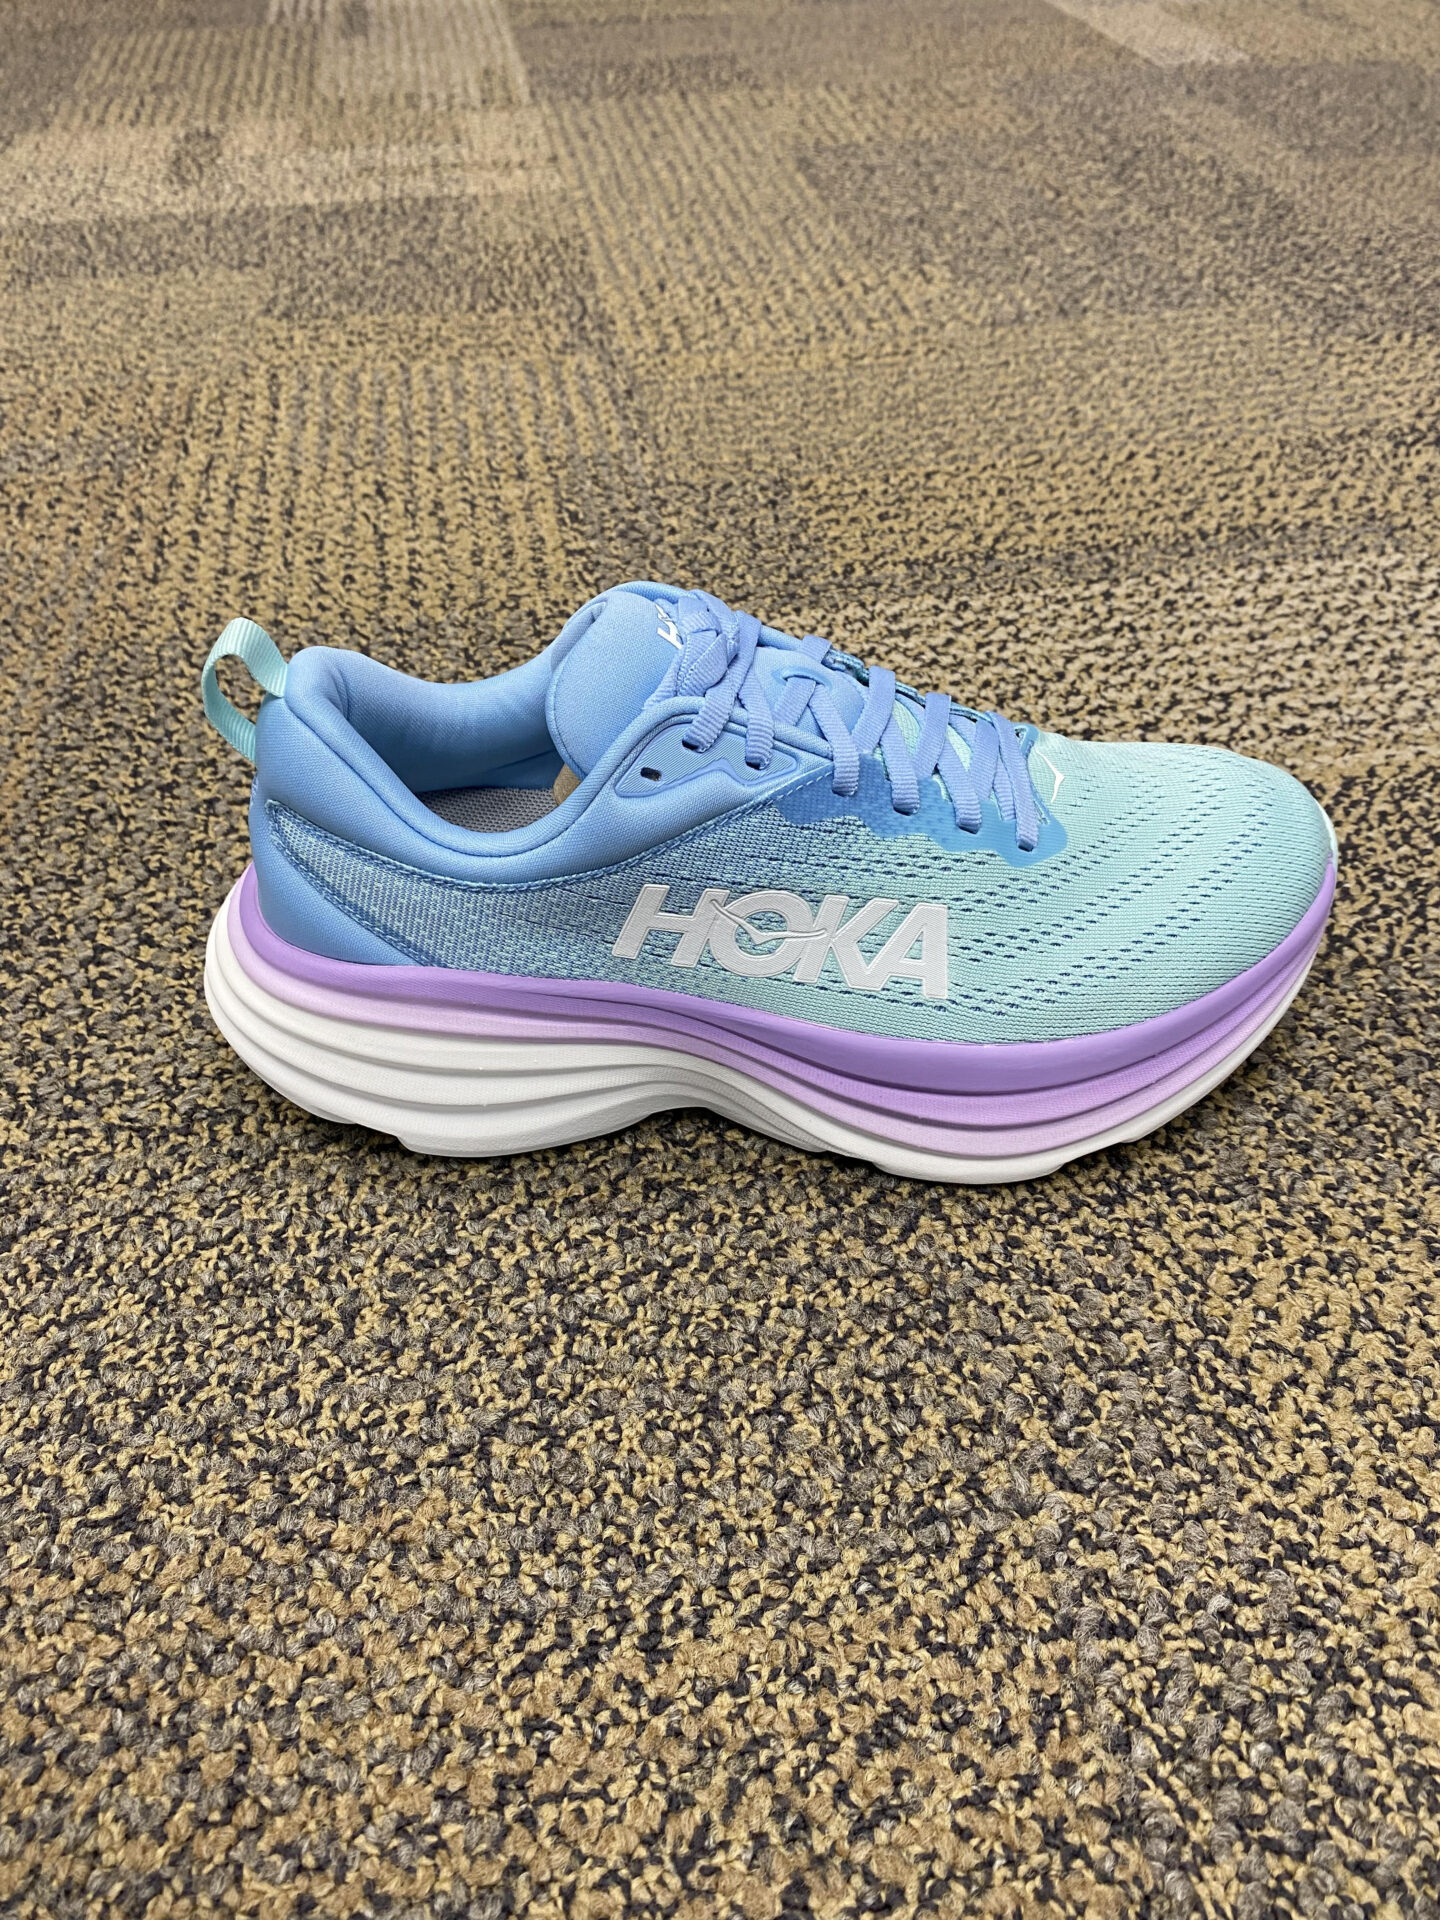 Women's Footwear - Niagara Foot Care Clinic and Orthotic Centre